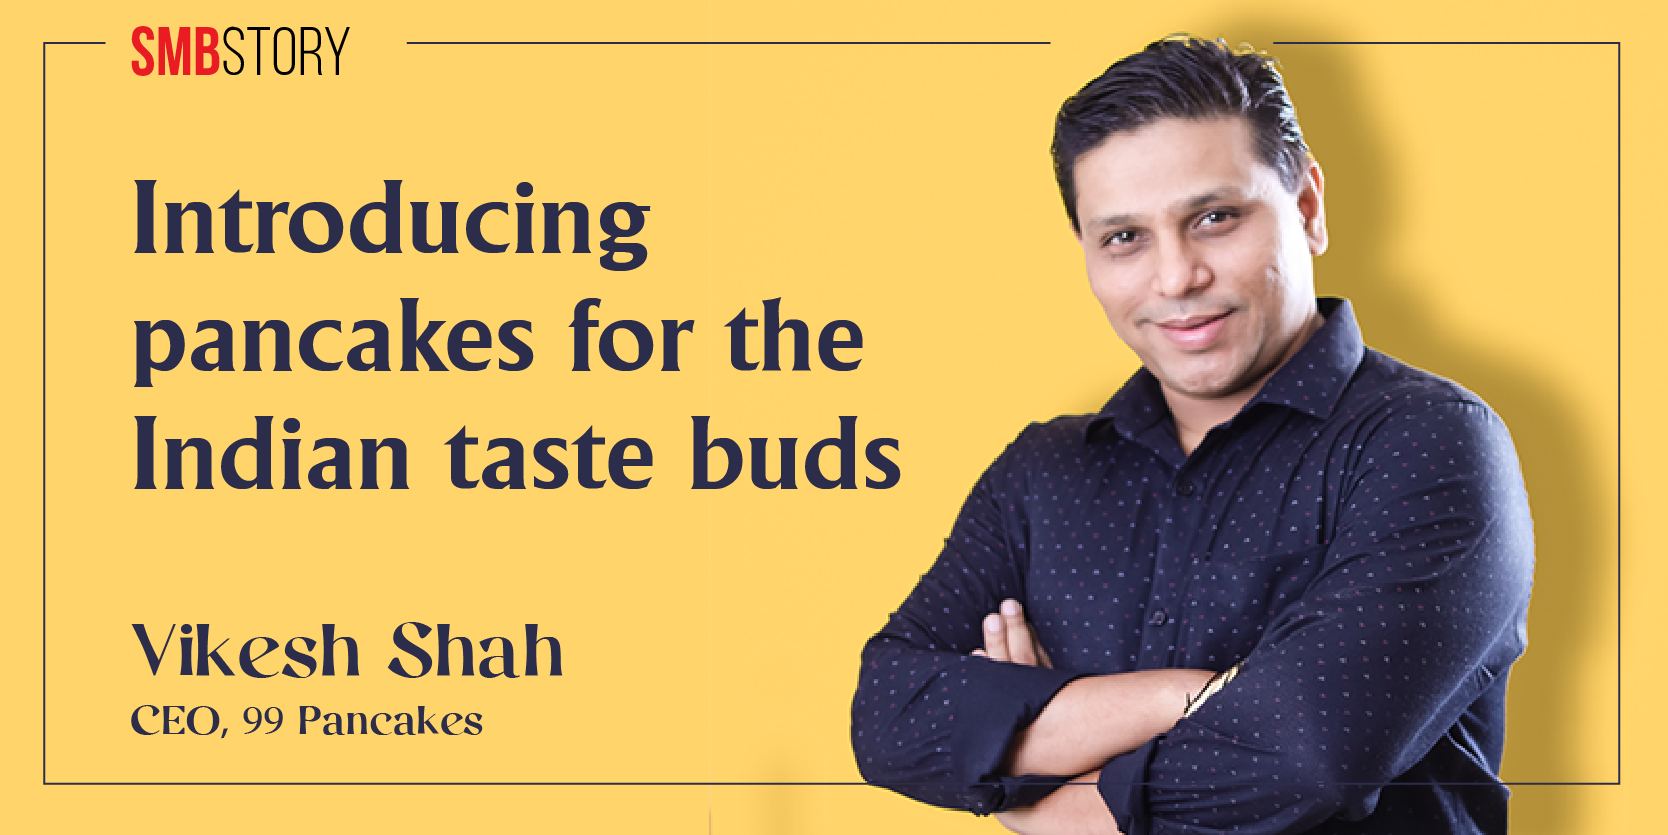 From earning Rs 700 a month, this entrepreneur went on to launch 43 pancake stores across India